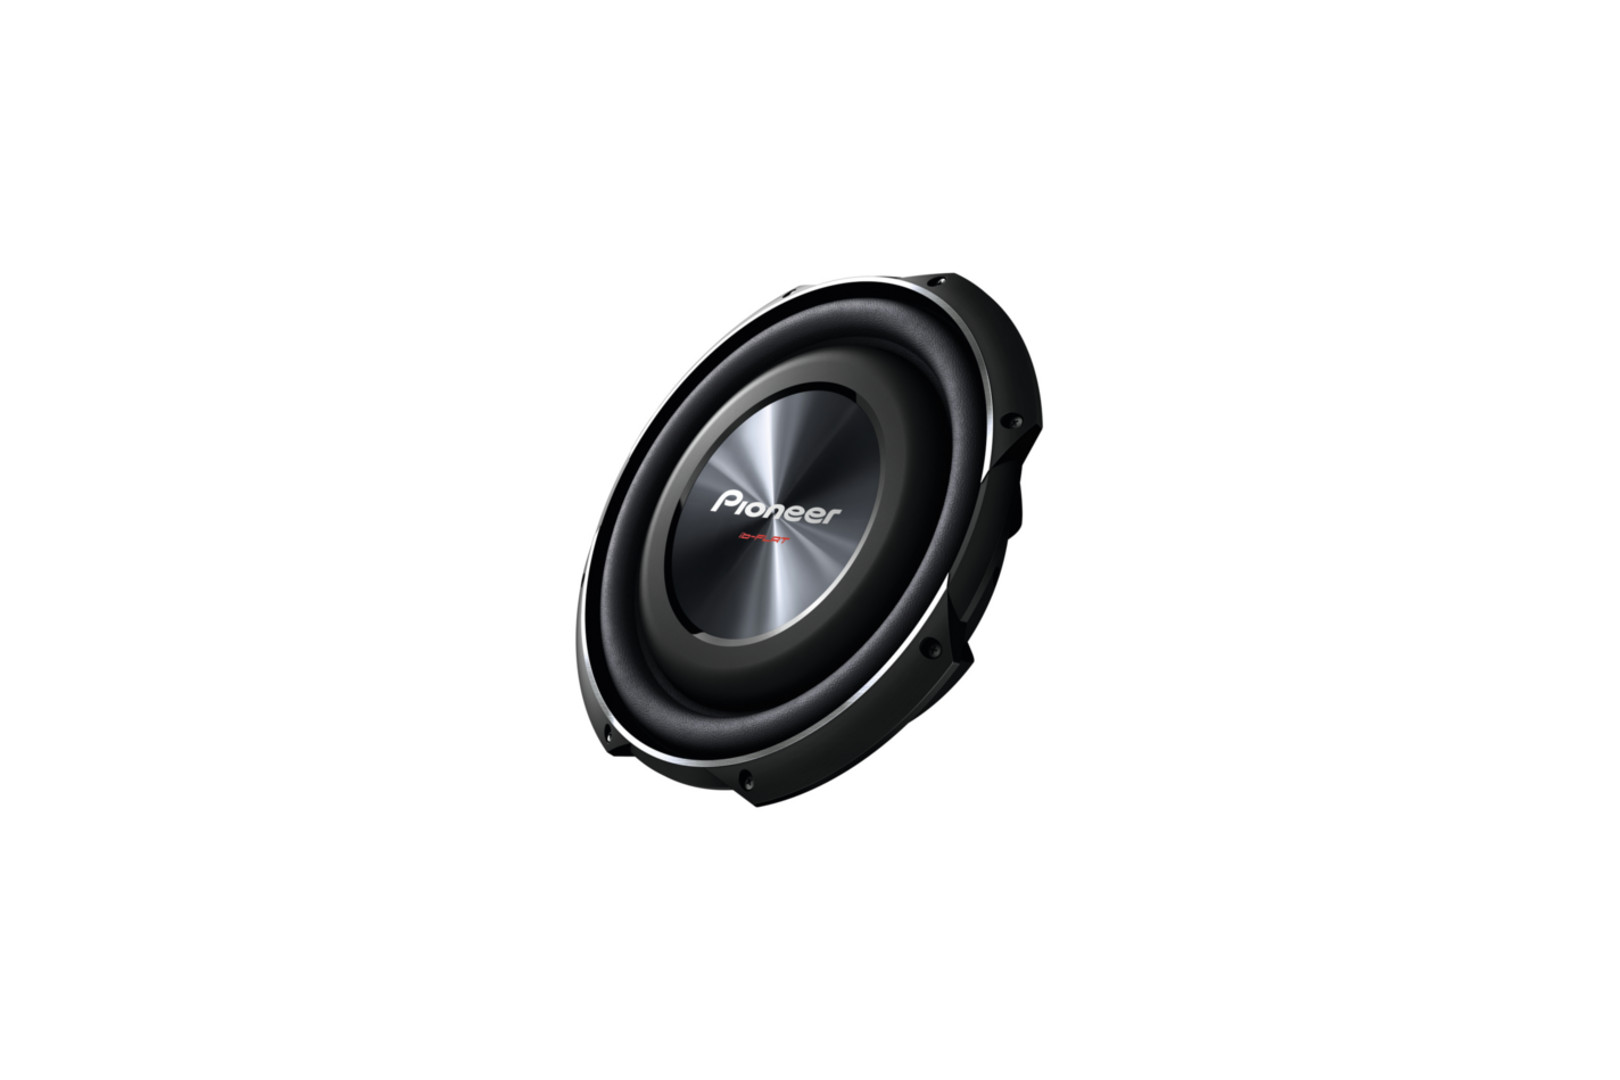 Pioneer TS-SW3002S4 Subwoofer